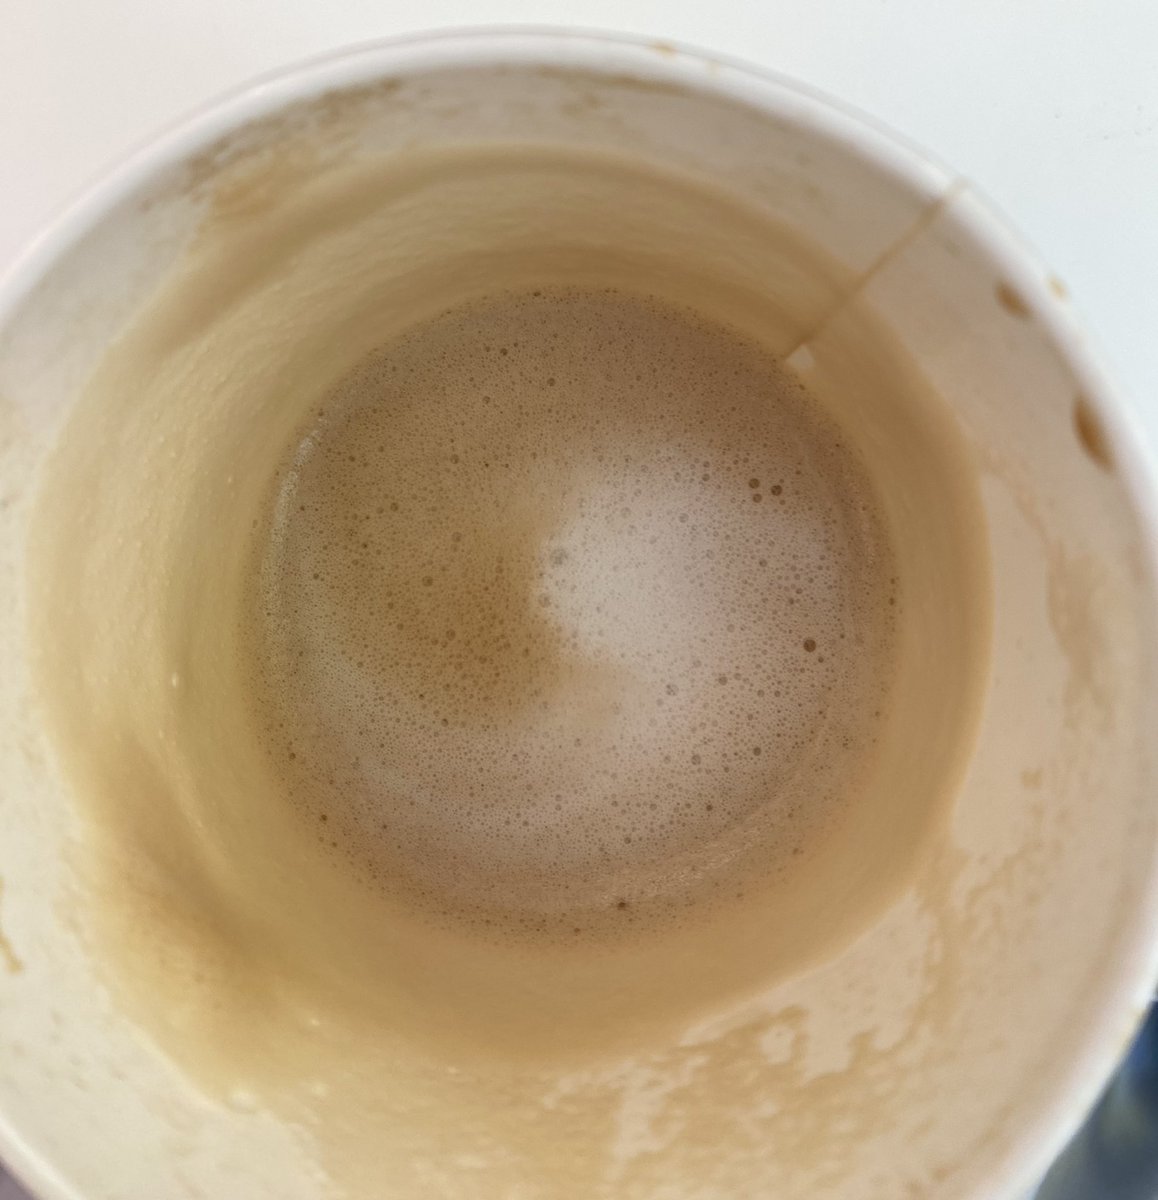 I think my coffee is trying to tell me something, and I need that something